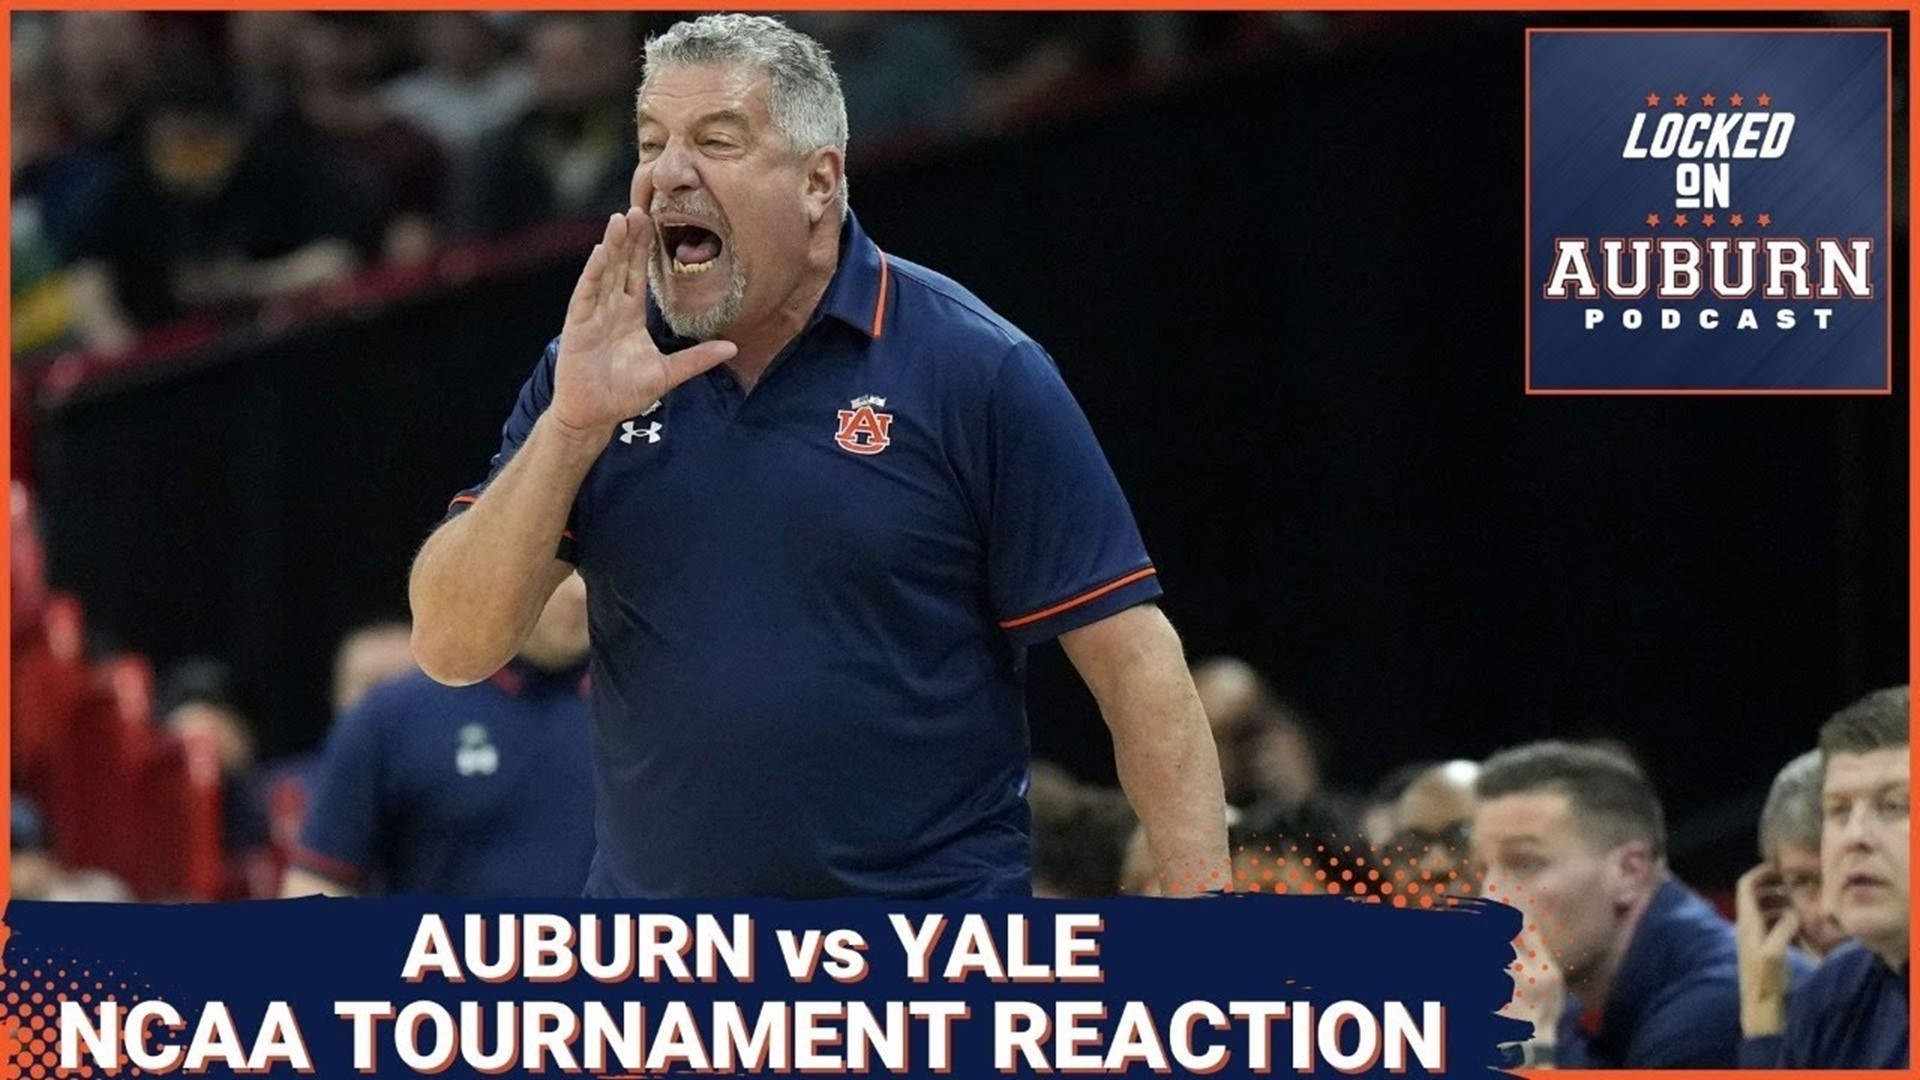 Auburn Basketball battled Yale in the first round of the NCAA Tournament.